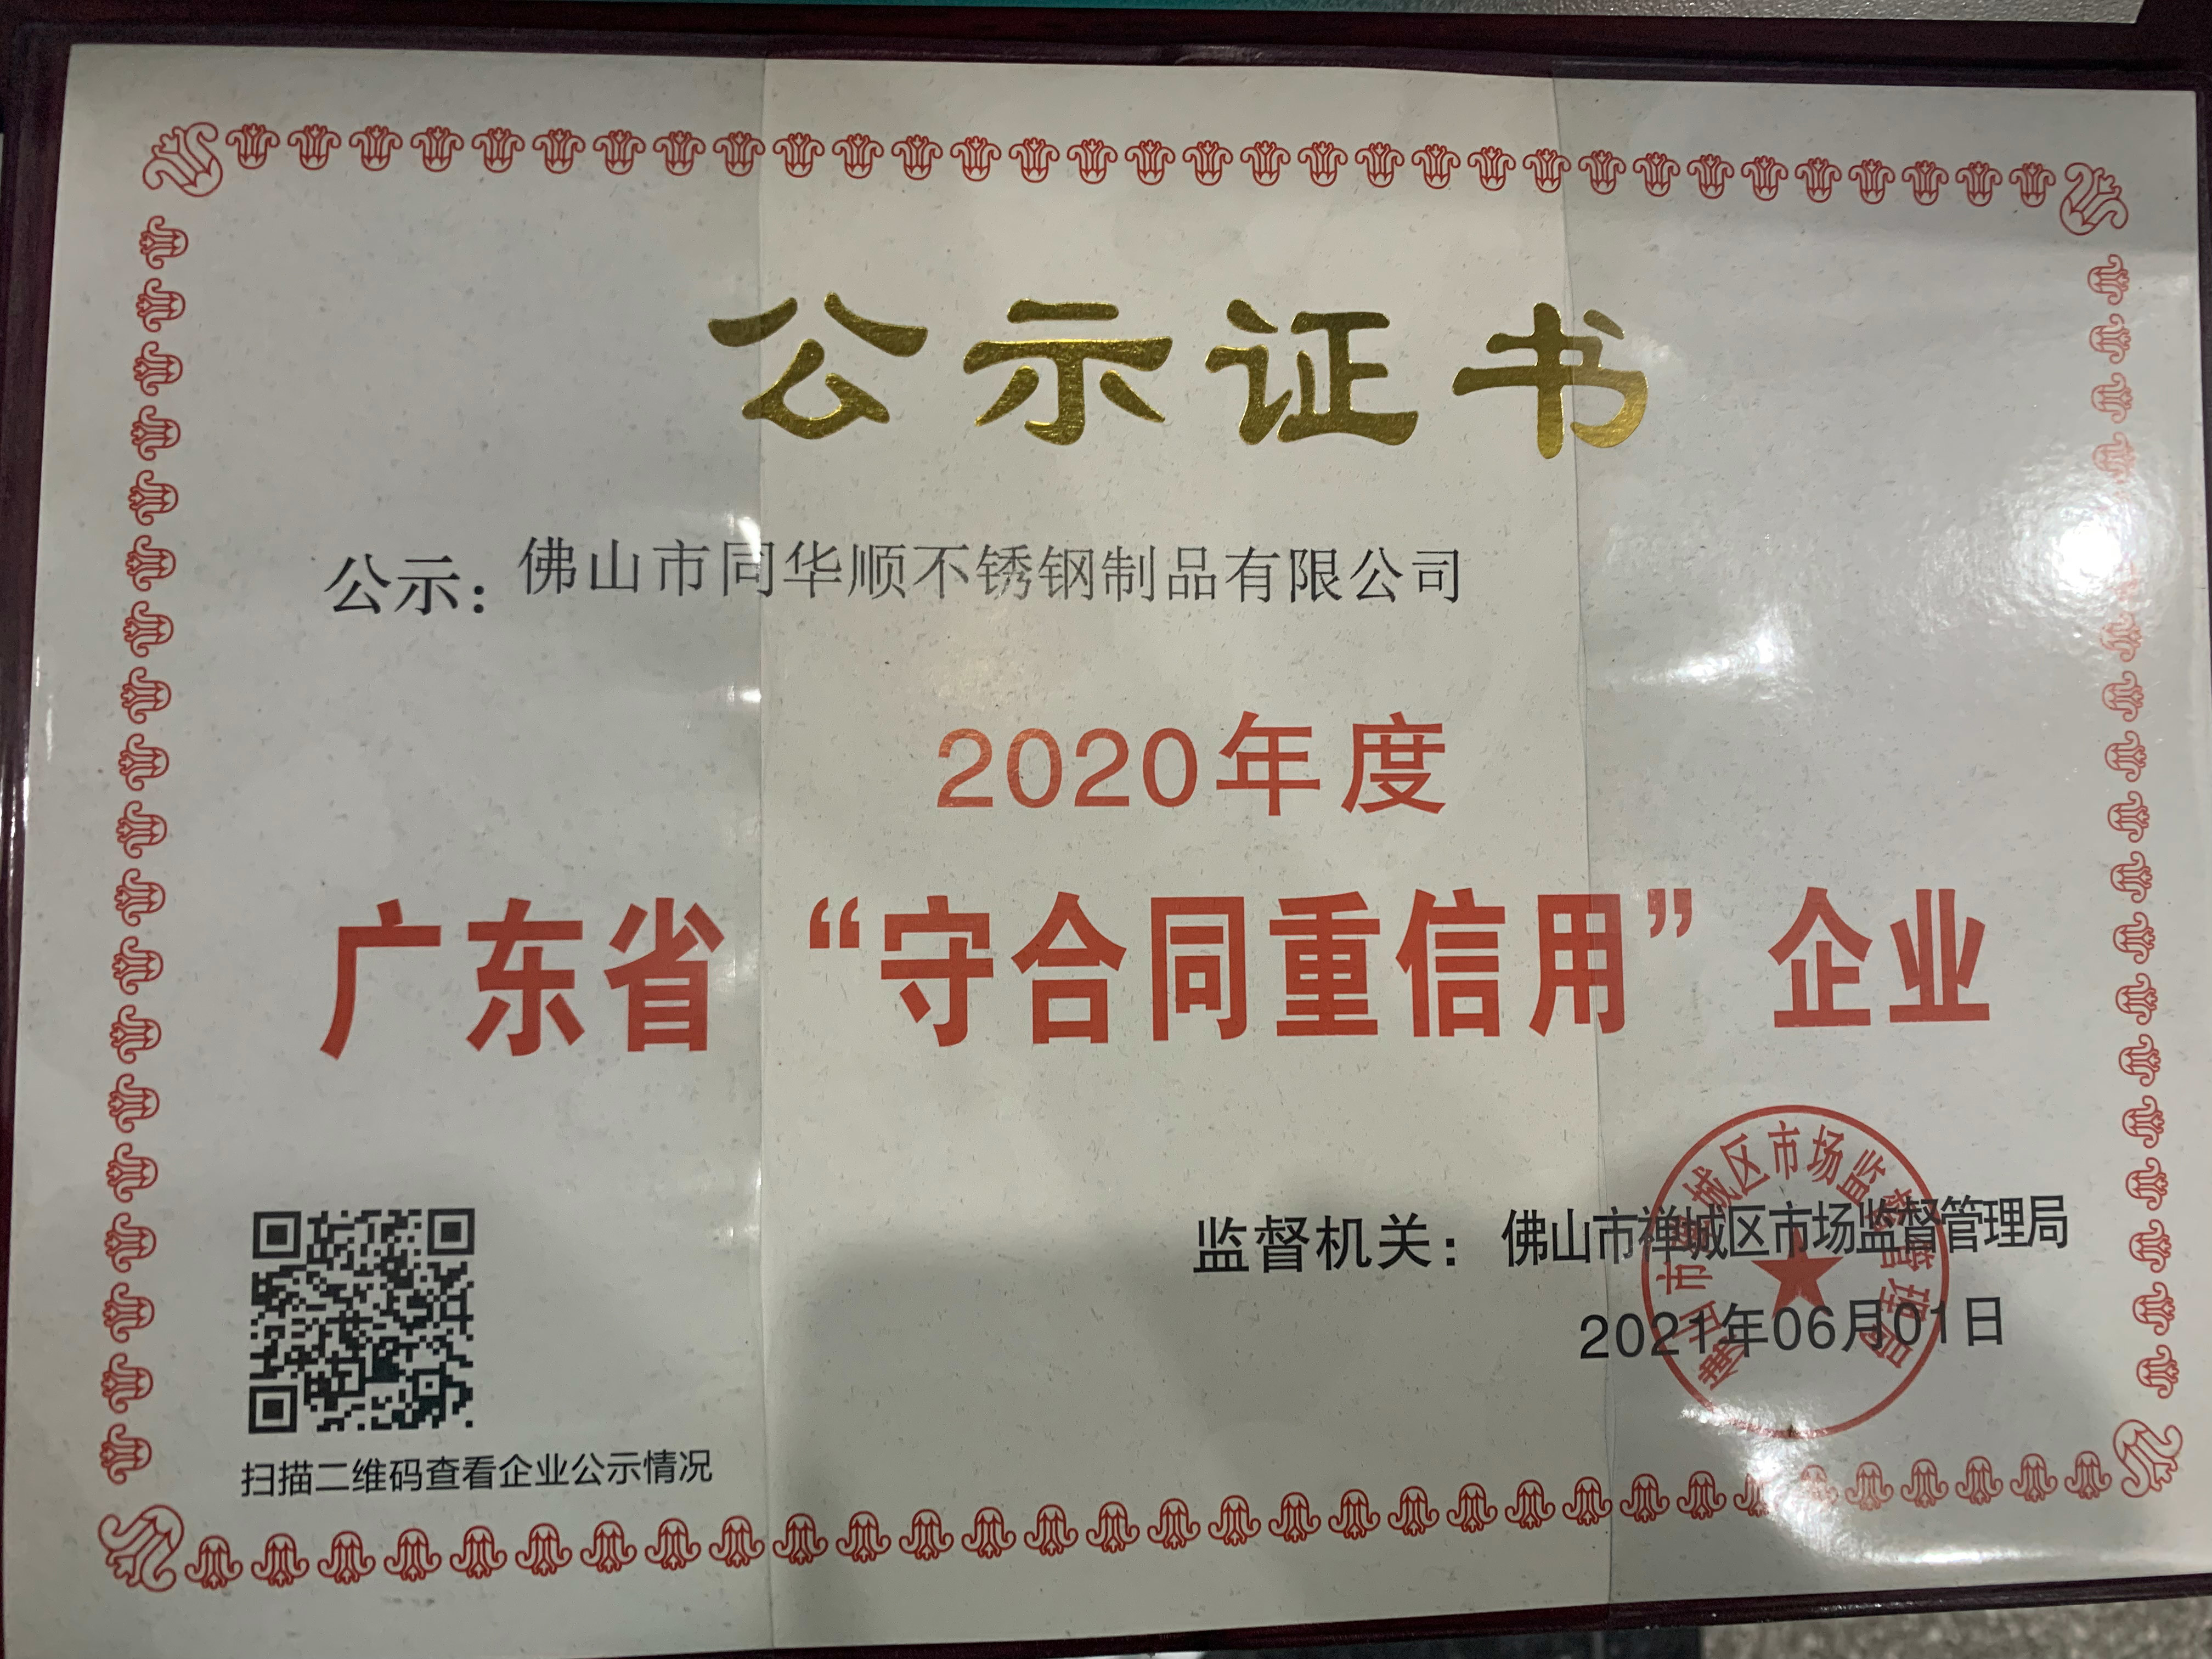 Foshan Tonghuashun Stainless Steel Products Co., Ltd. Certifications